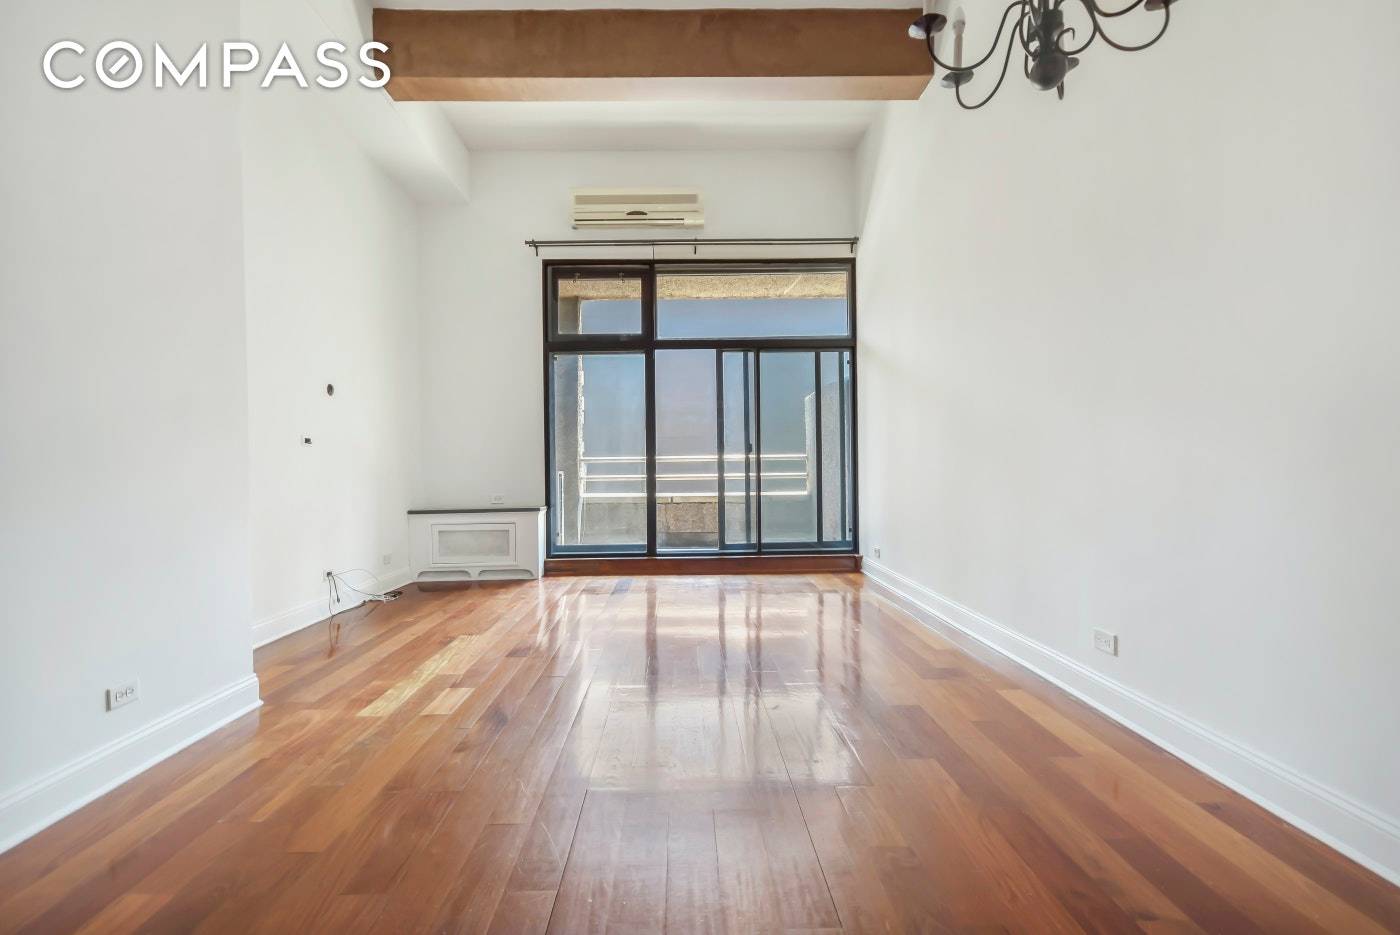 Welcome home to your sunny eastern facing one bedroom with bonus sleeping loft home office.